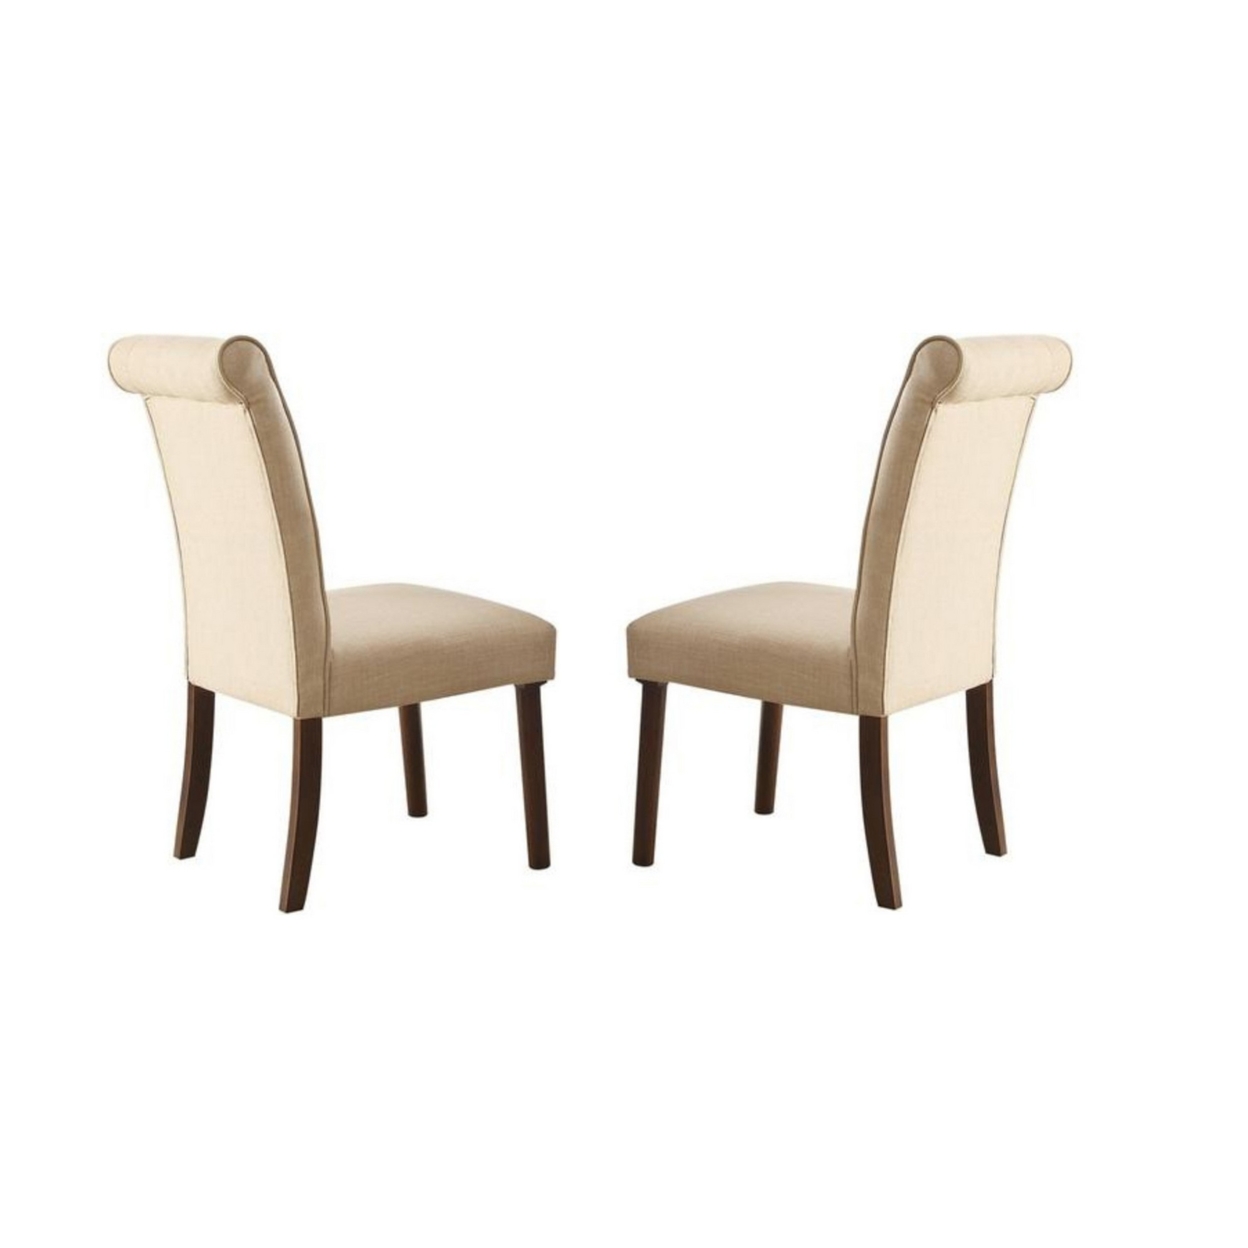 Dining Chair With Fabric Button Tufted Back, Set Of 2, Beige- Saltoro Sherpi